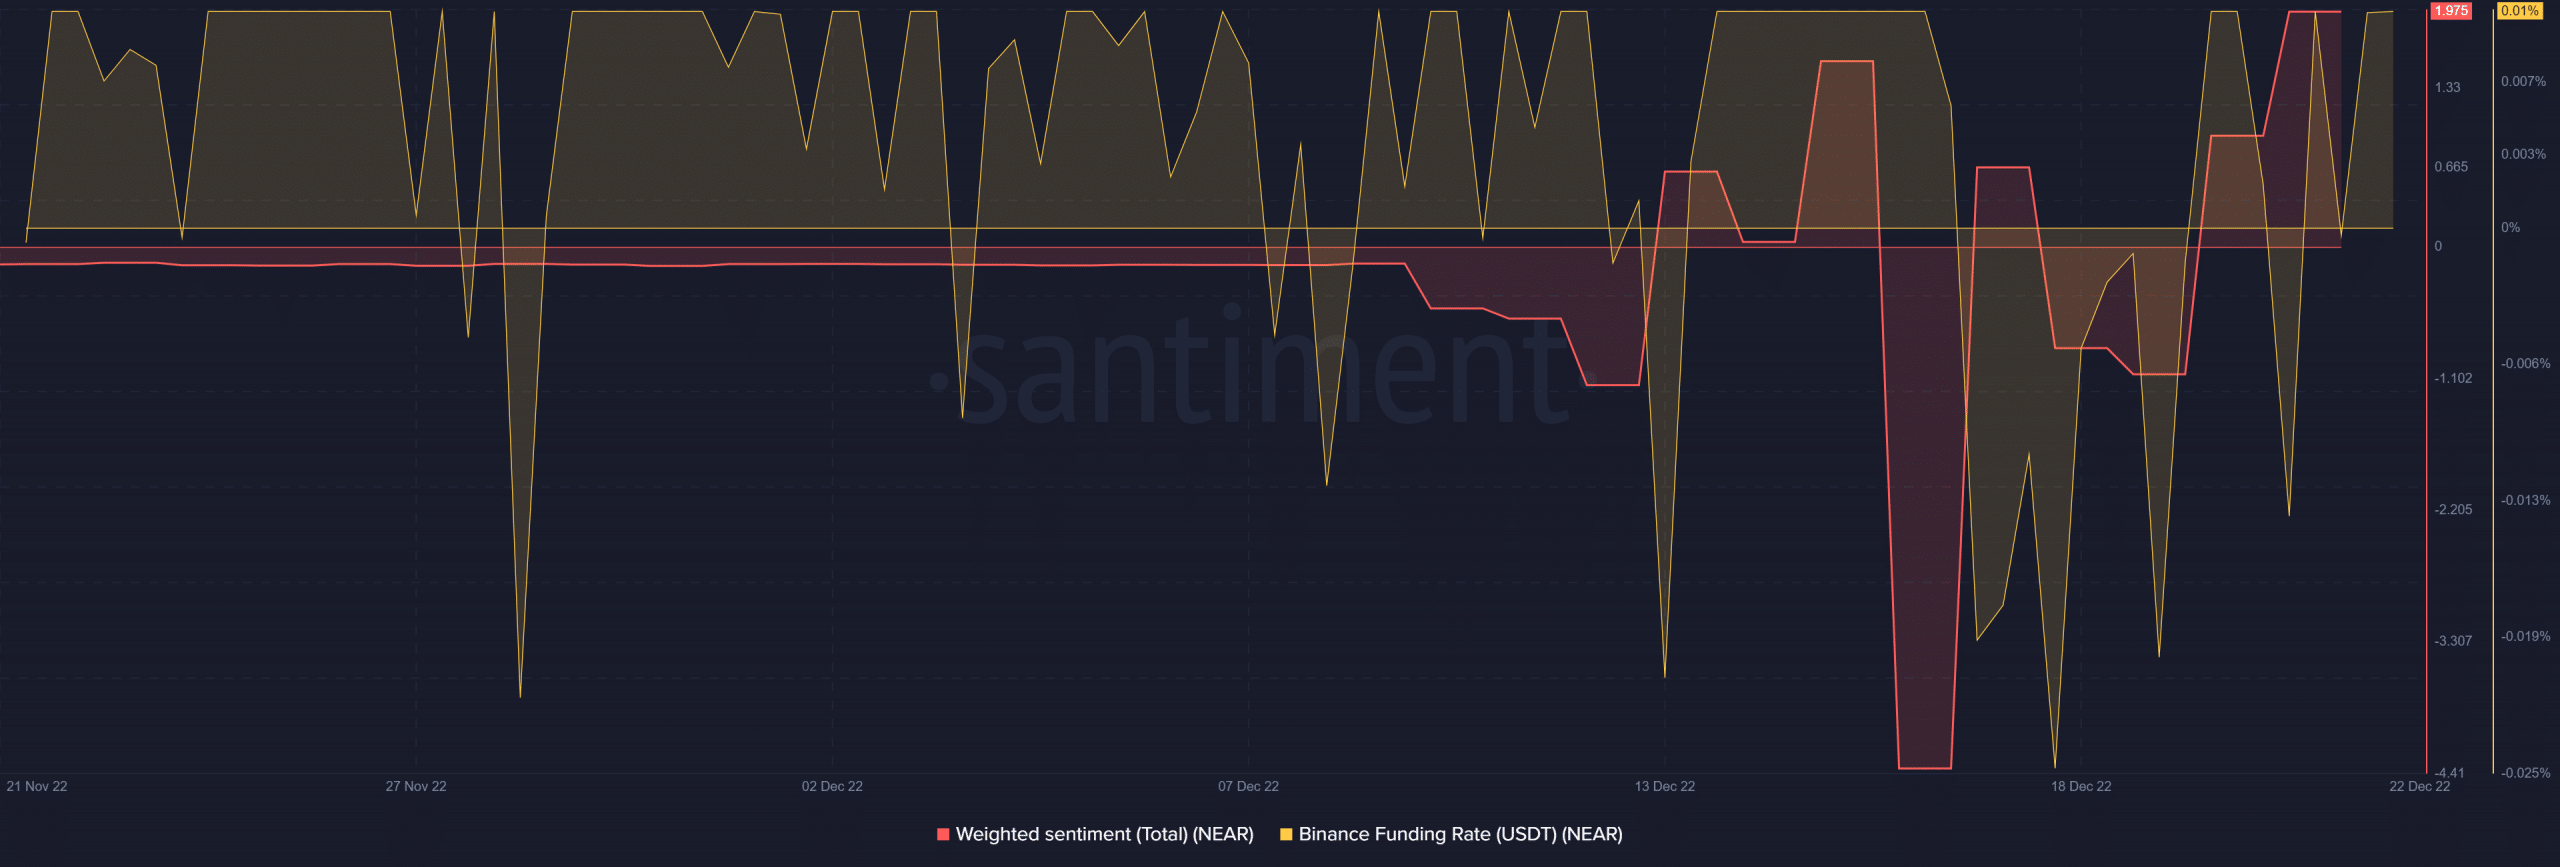 NEAR binance funding rate and weighted sentiment